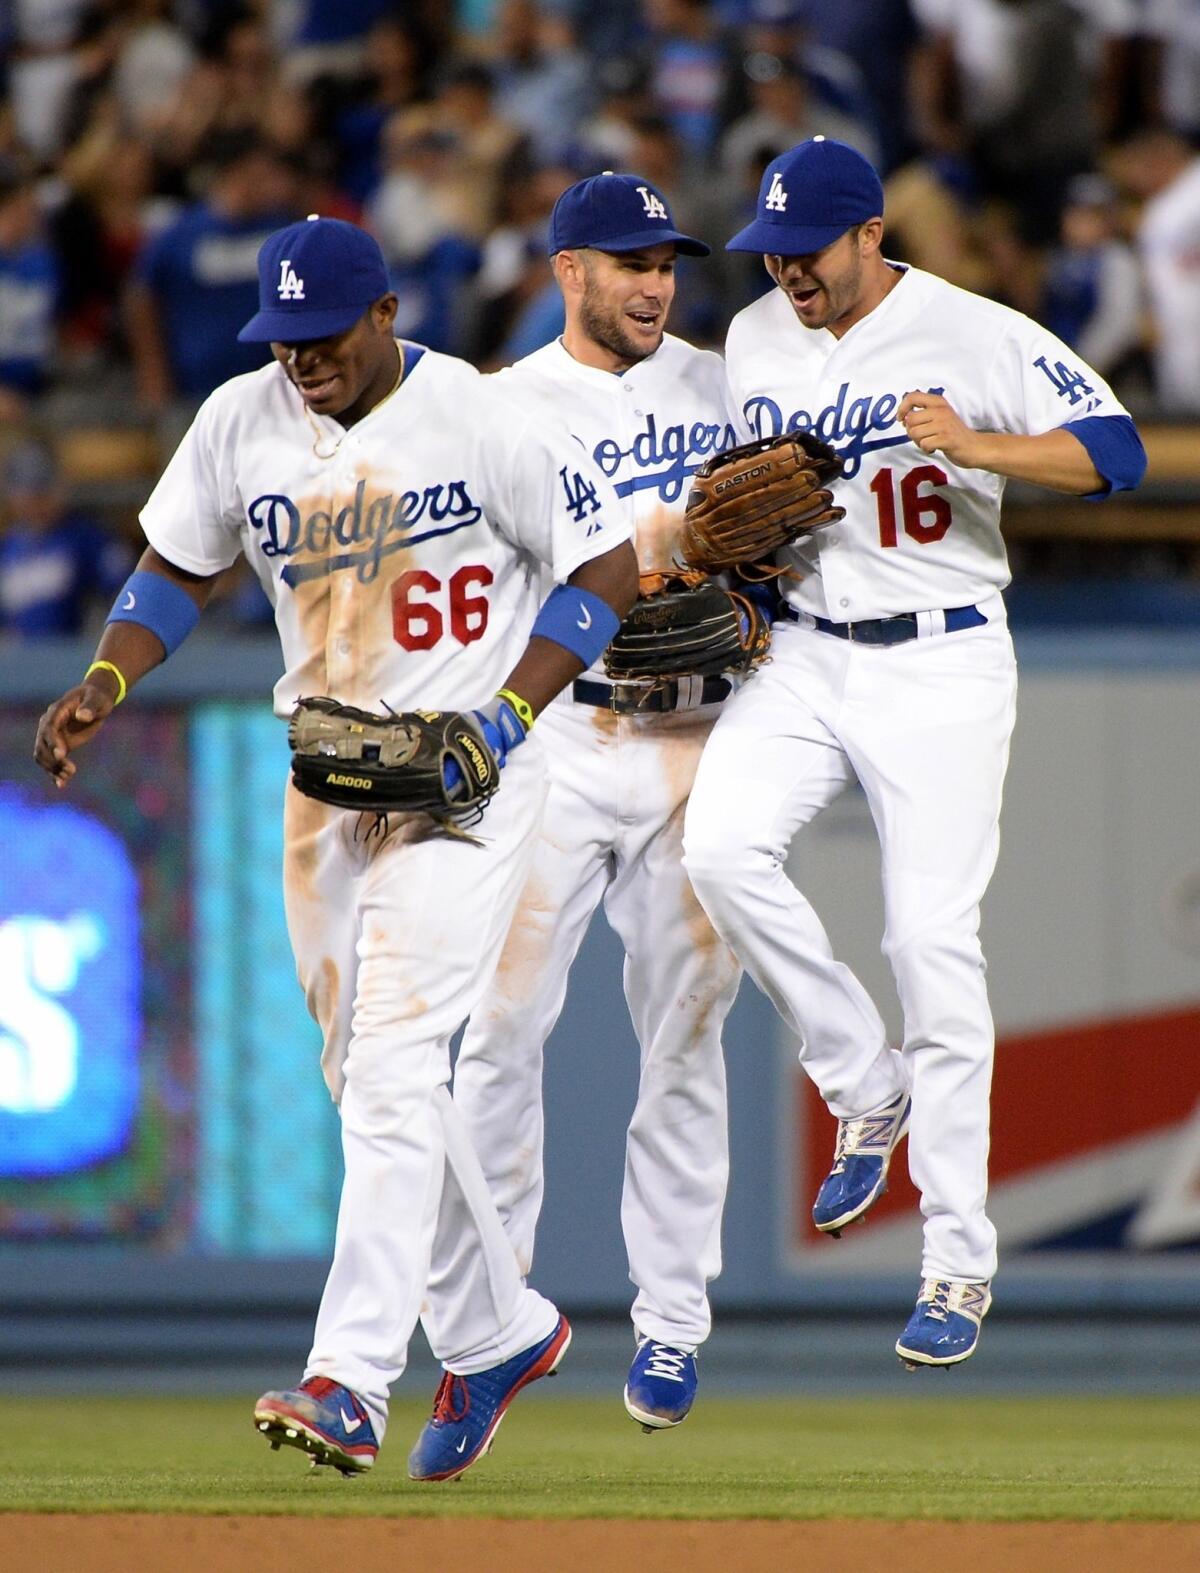 Dodgers outfielders Yasiel Puig, left, Skip Schumaker and Andre Ethier celebrate following the team's 4-1 victory over the Cincinnati Reds on Saturday.